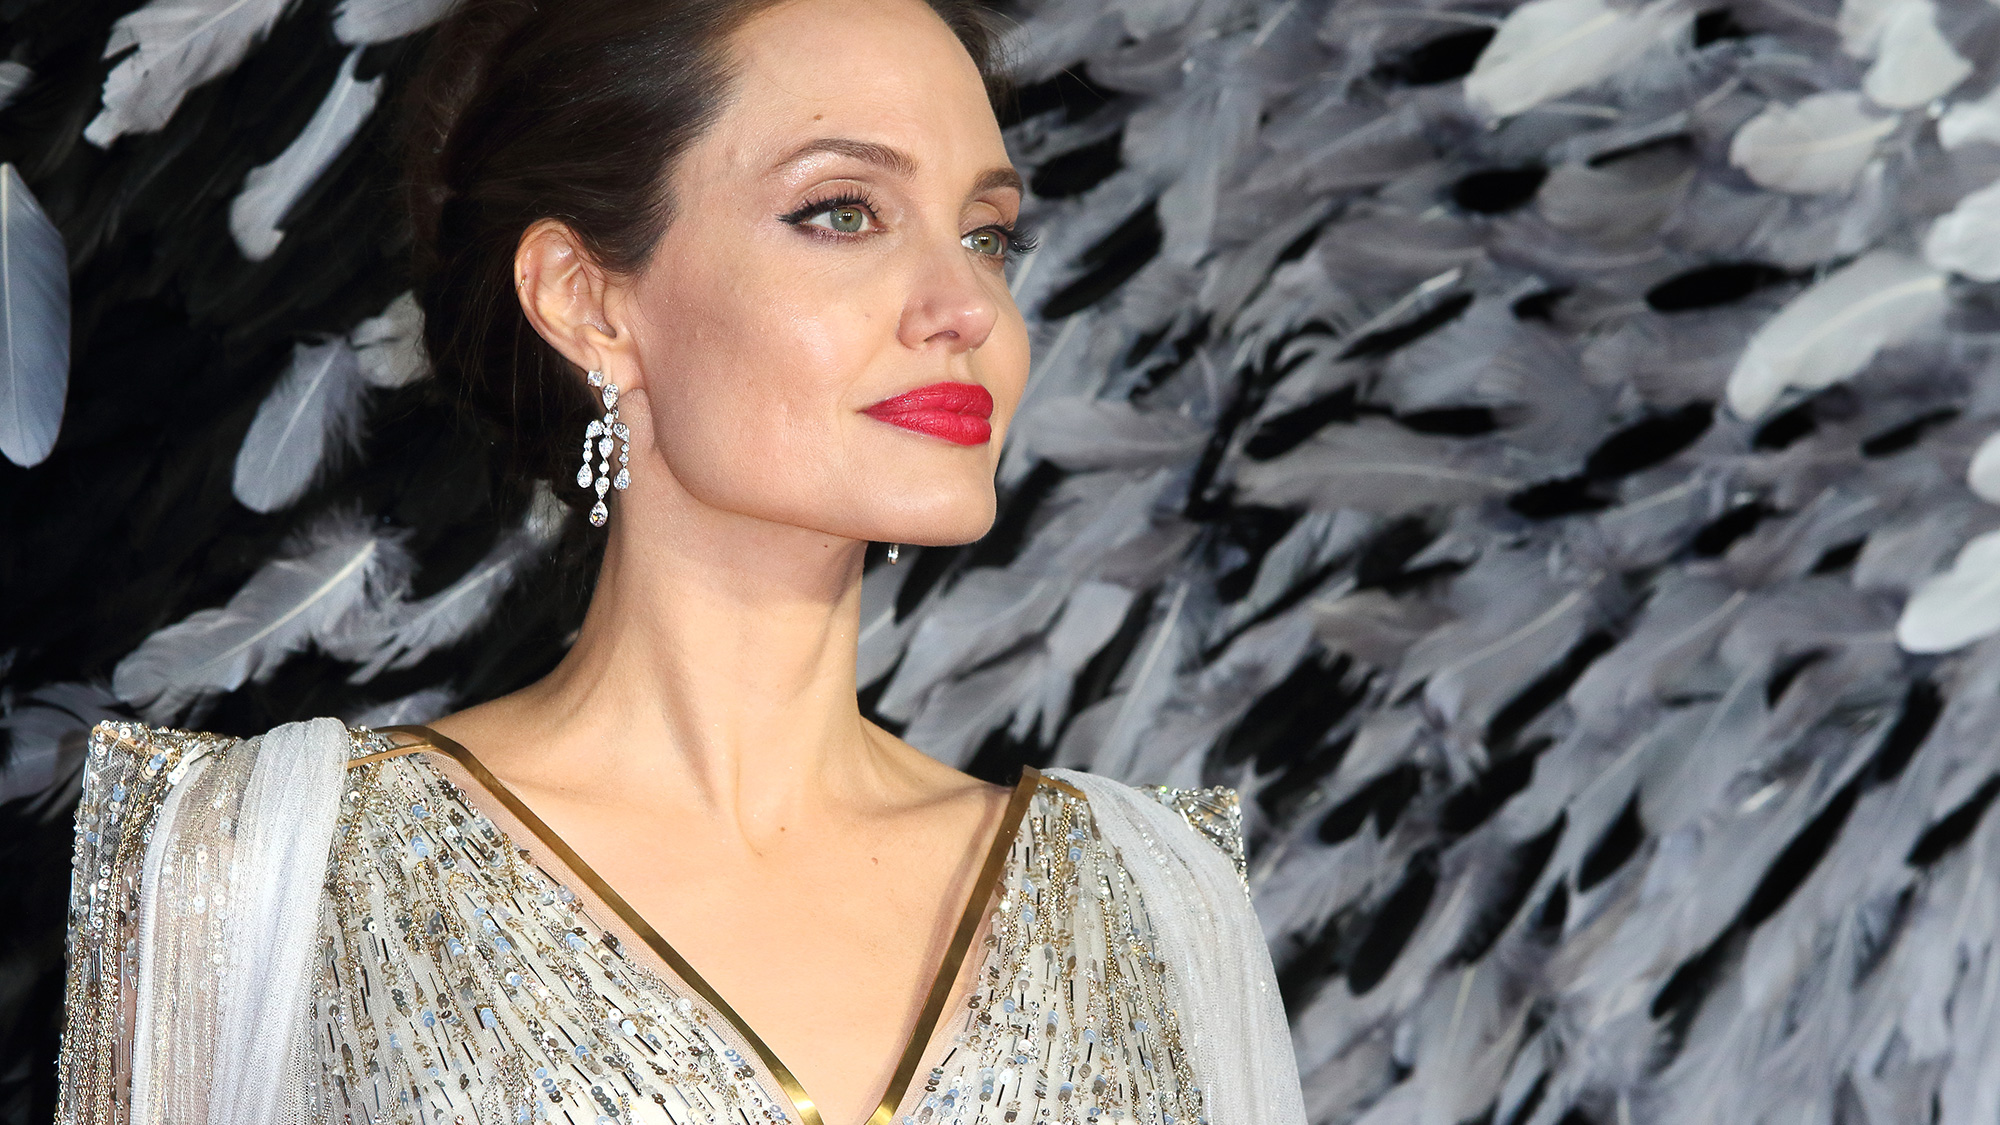 Is Angelina Jolie launching a clothing line?